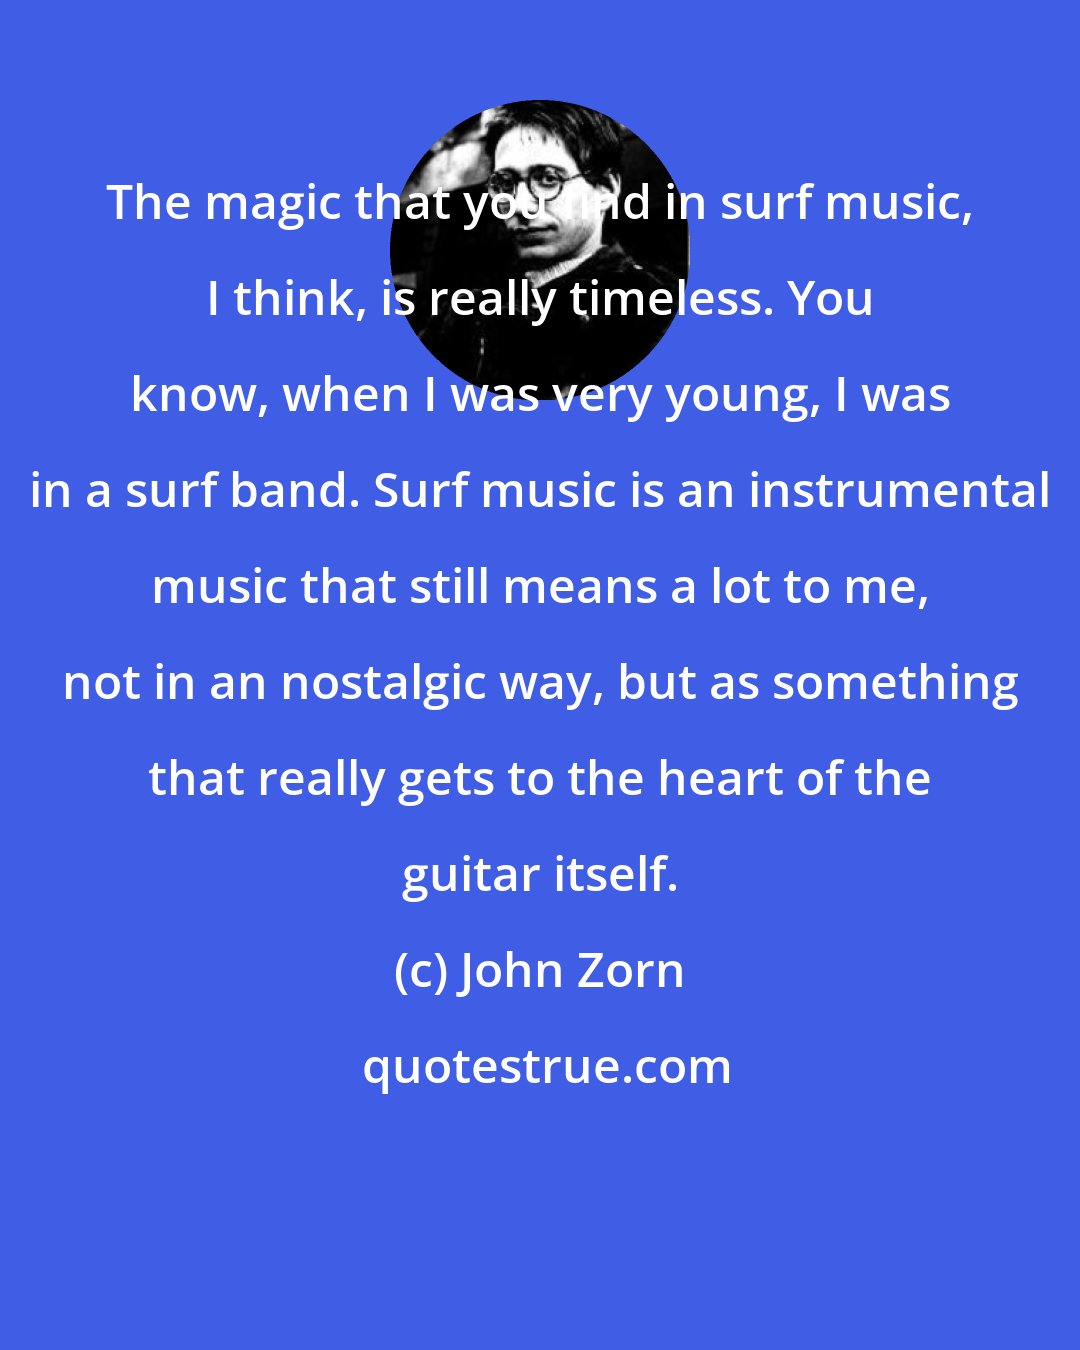 John Zorn: The magic that you find in surf music, I think, is really timeless. You know, when I was very young, I was in a surf band. Surf music is an instrumental music that still means a lot to me, not in an nostalgic way, but as something that really gets to the heart of the guitar itself.